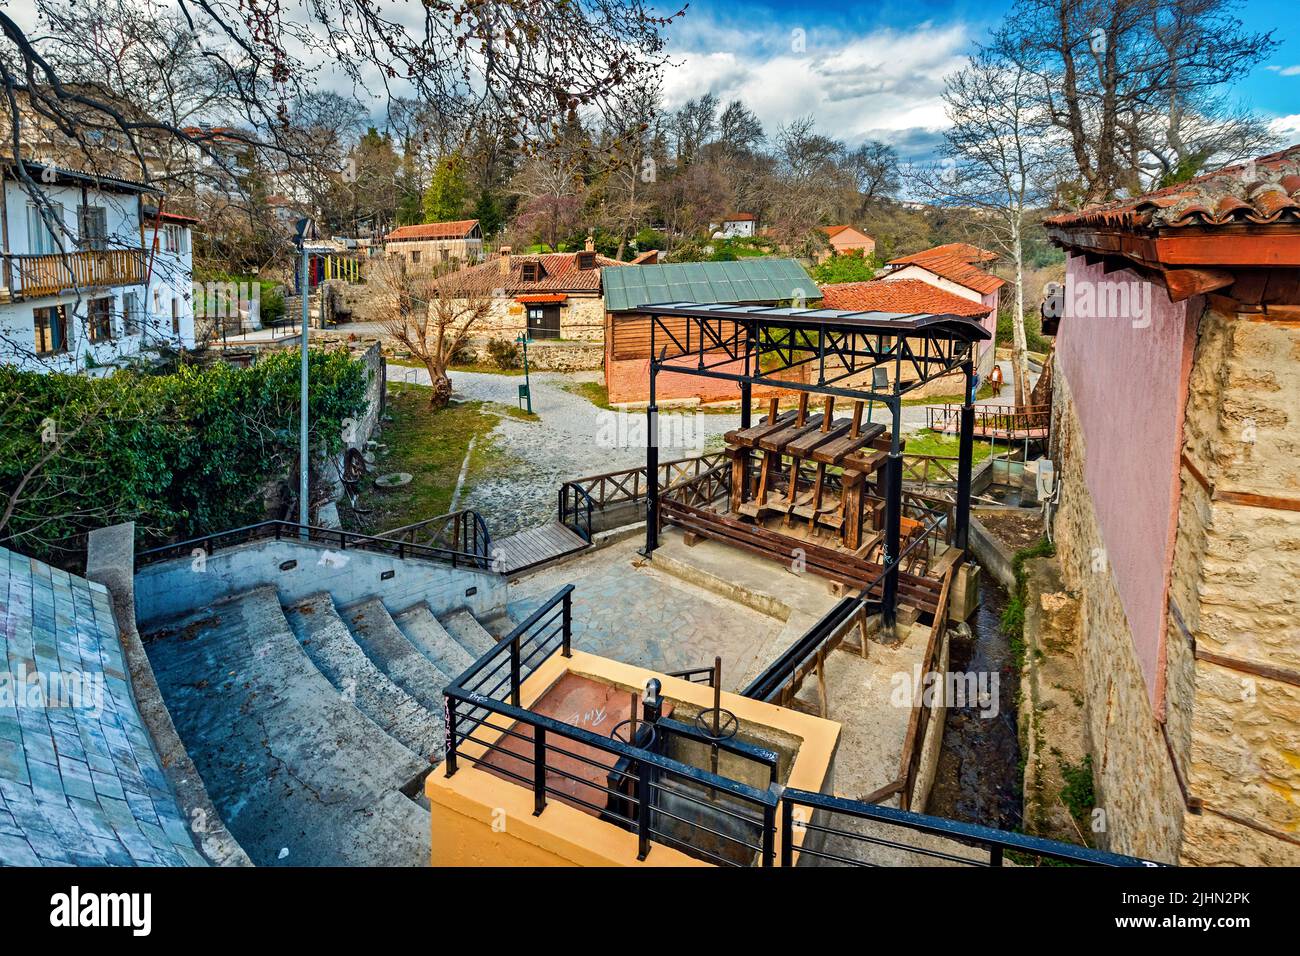 At the Open-air Museum of Water and Water Power in Varosi, the old part of Edessa town, Pella, Macedonia, Greece. Stock Photo